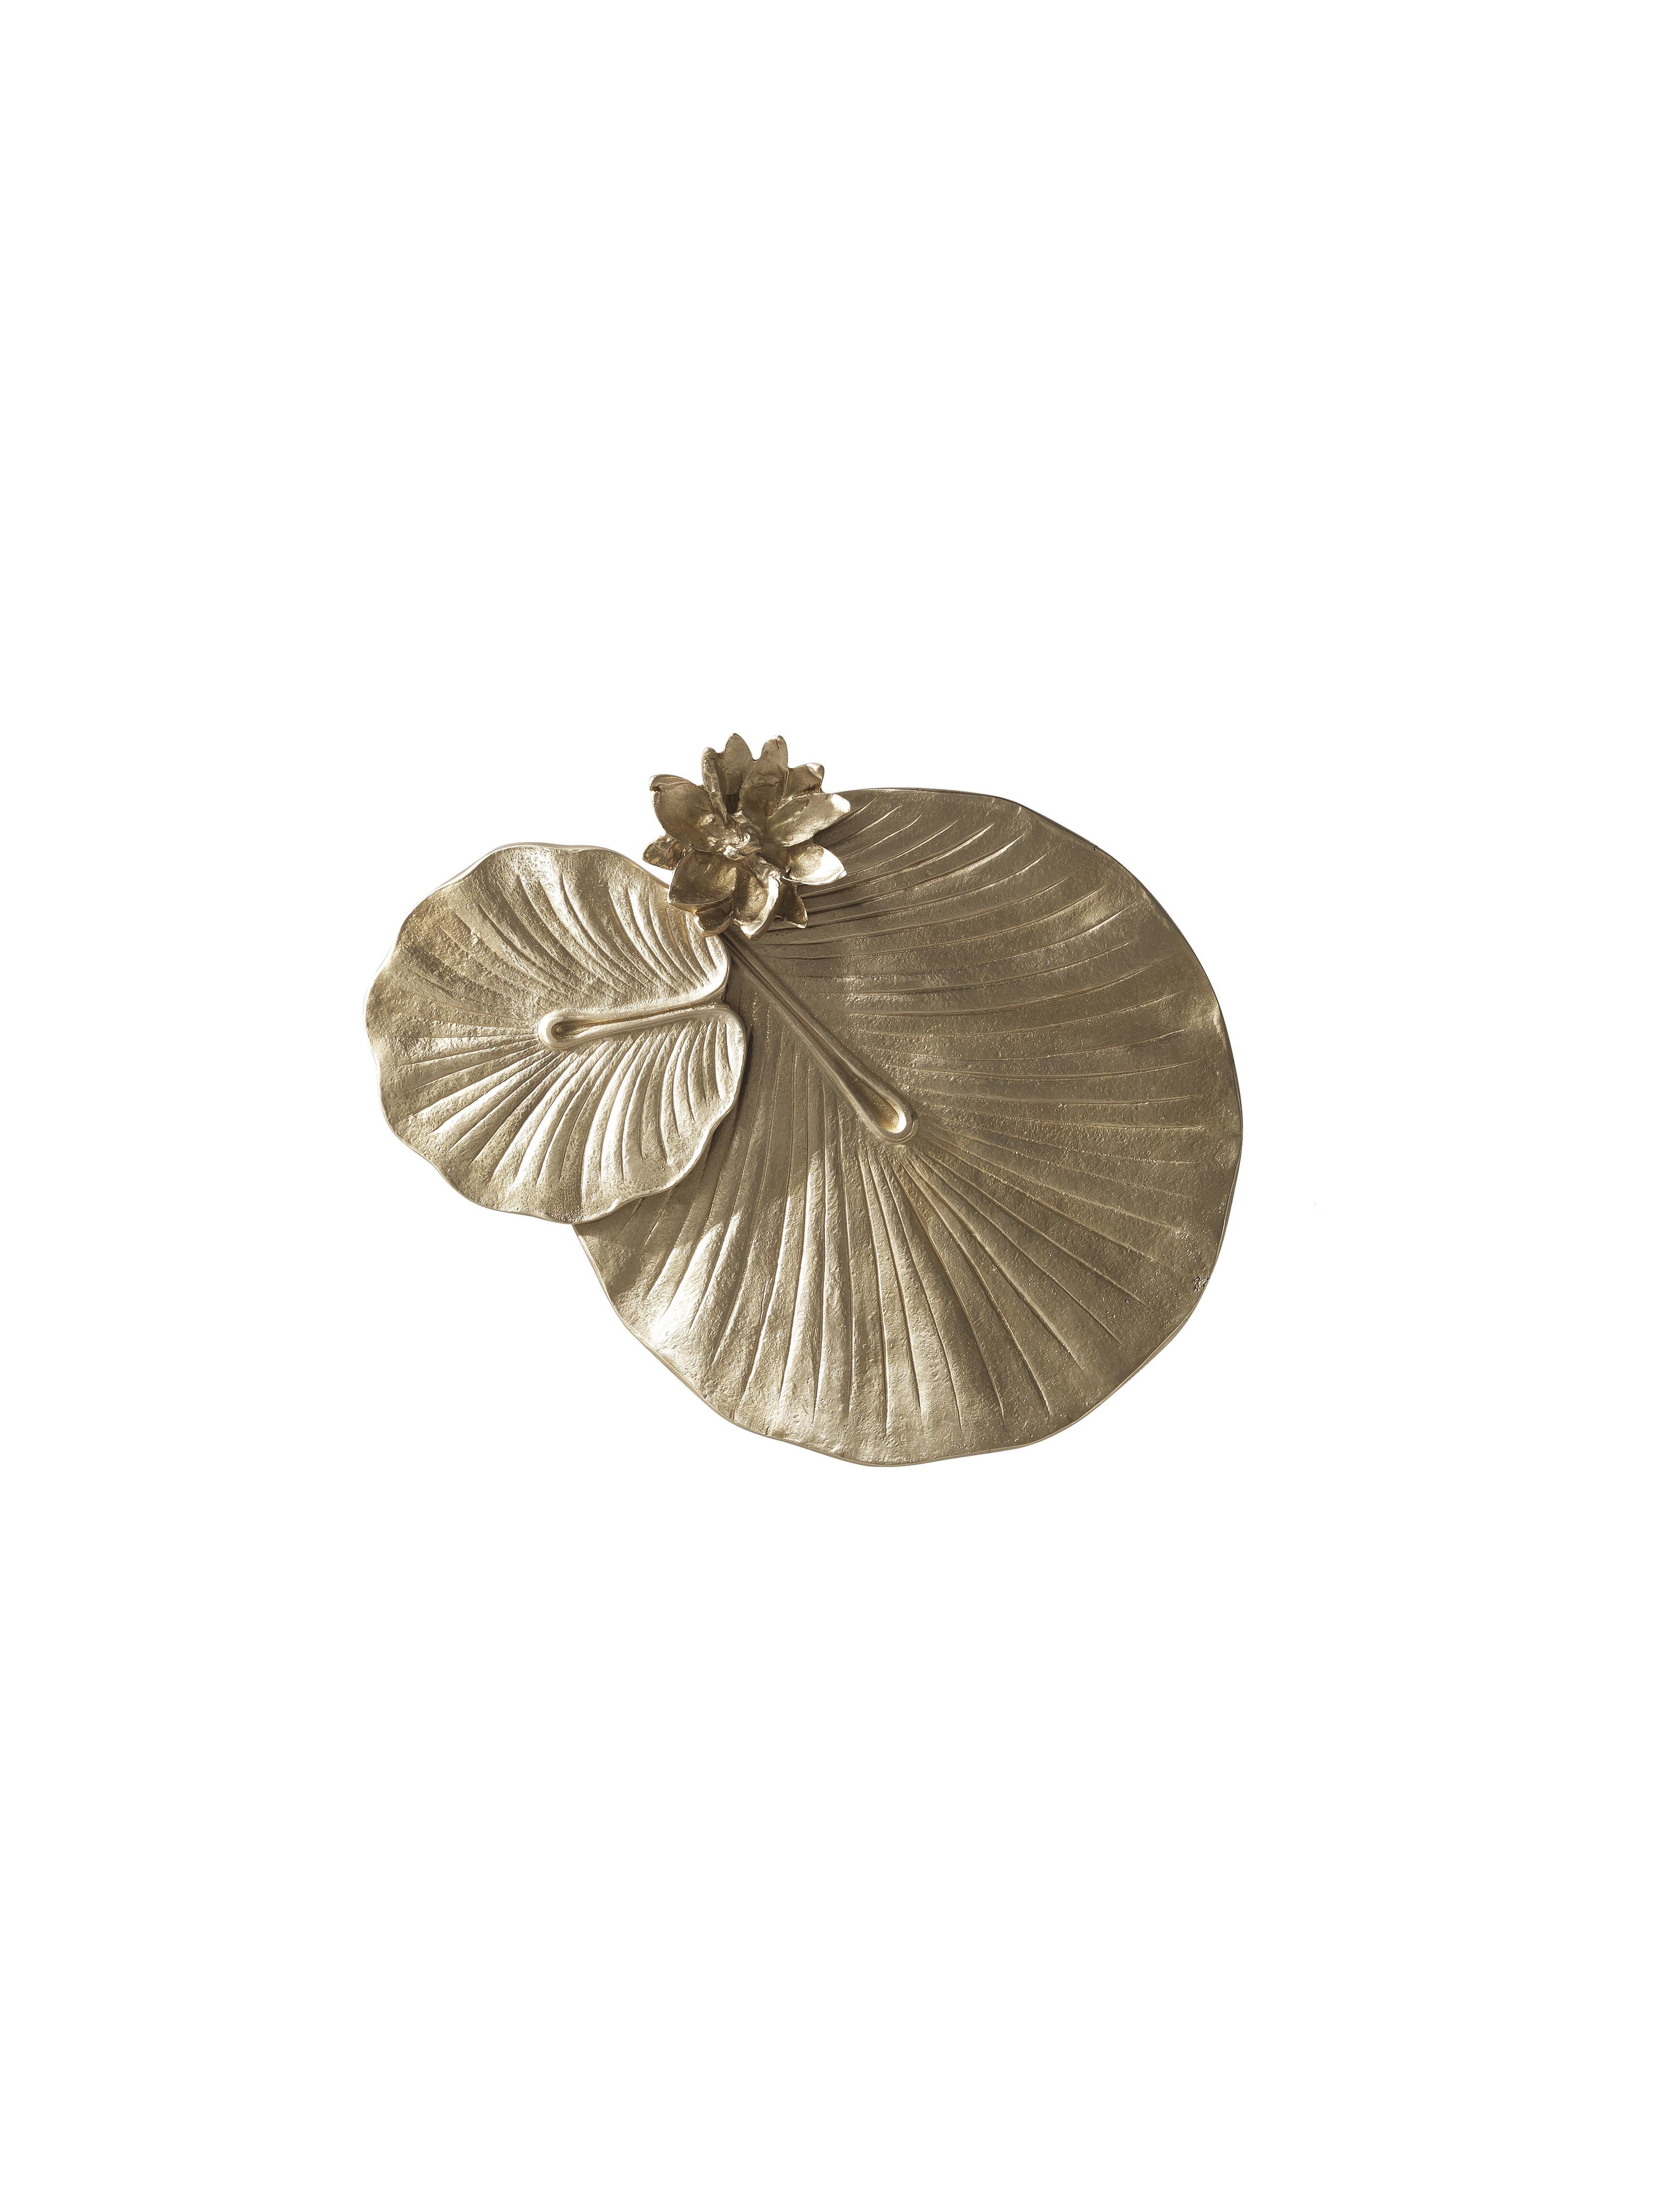 The beauty of nature is transformed into a sophisticated decorative element in Monet table: a scenographic piece of furniture where the lotus leaf motif in hand-chiseled brass casting is the element of wonder, a connection with one of the most